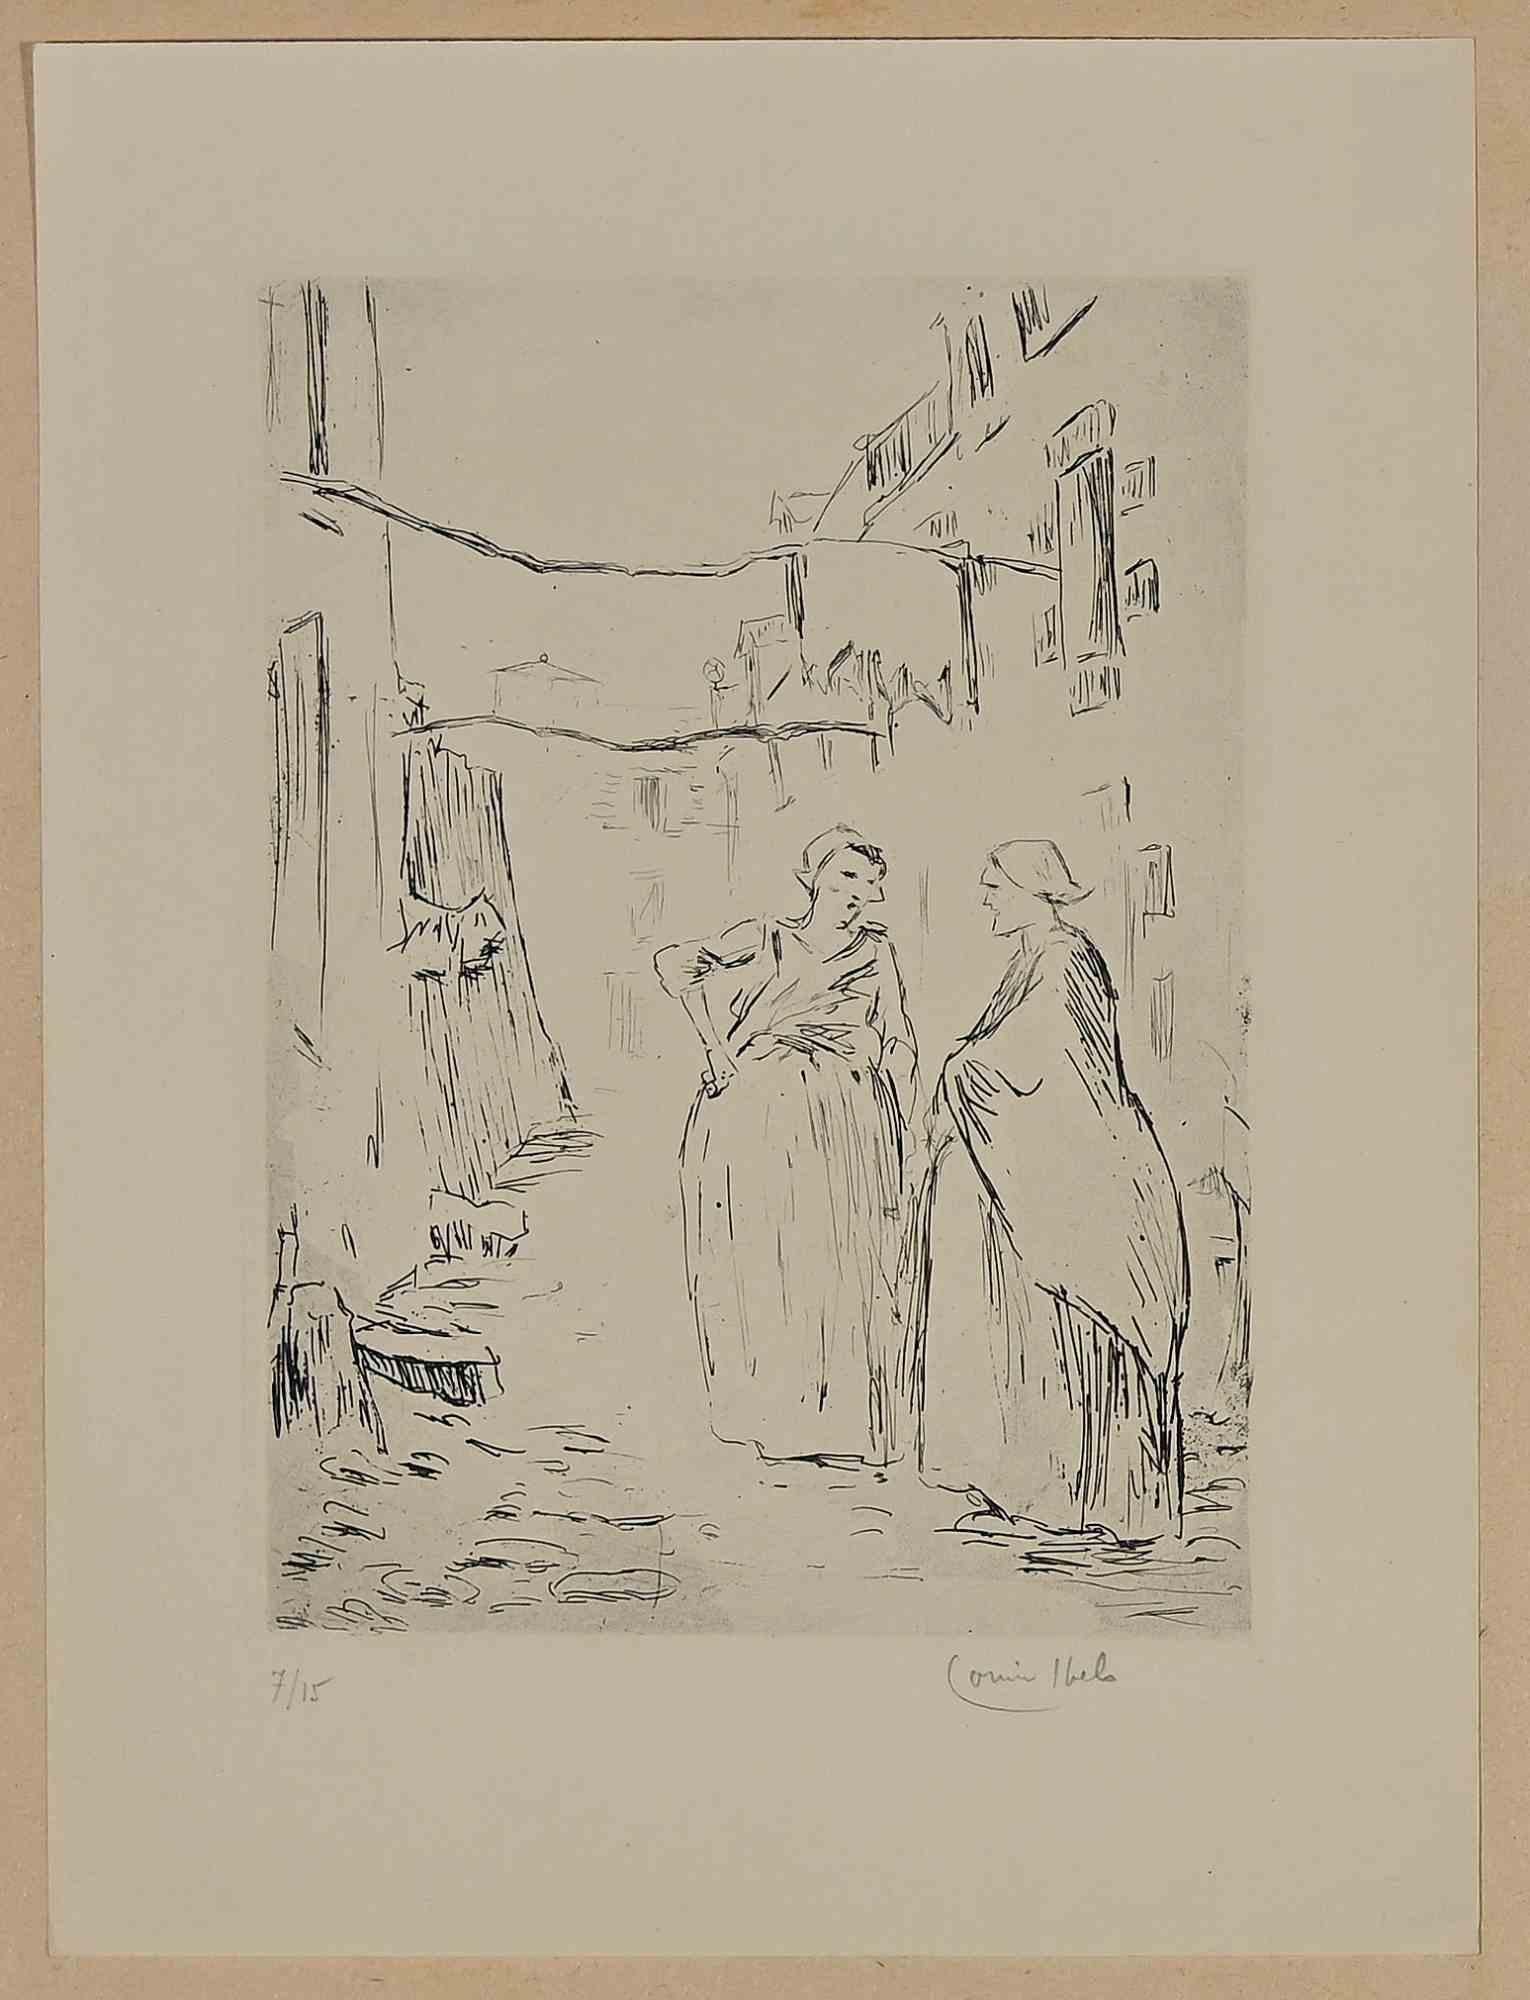 Women in Trouble is an Original Etching realized by Louise Thels in 1925.

The artwork is drawn directly on copper by the artist, first state test on paper.

Produced in 15 copies, before the resumption with aquatint, this is n. 7.

Signature  and